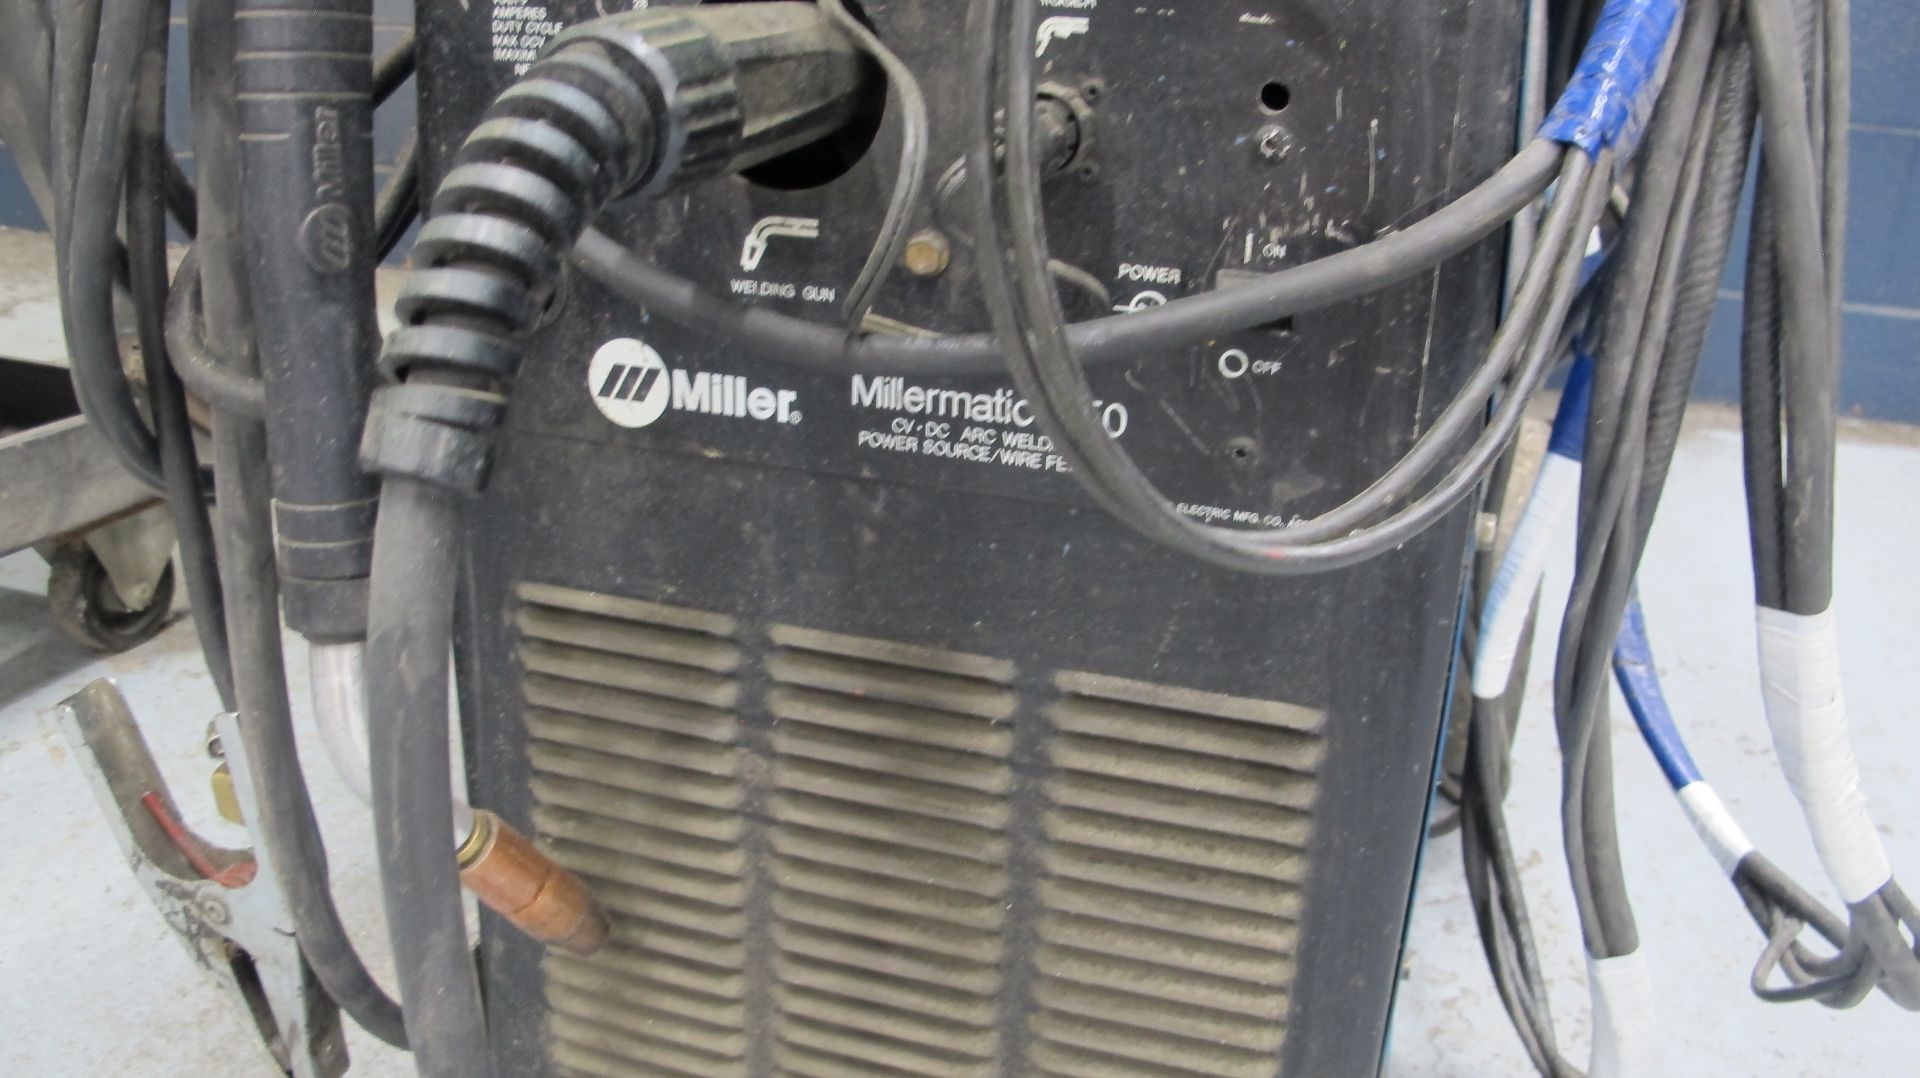 MILLER MILLERMATIC 250 CV-DC WELDING POWER SOURCE W/ MILLER SPOOLMATIC 15A WIRE FEEDER, CABLES AND - Image 3 of 6